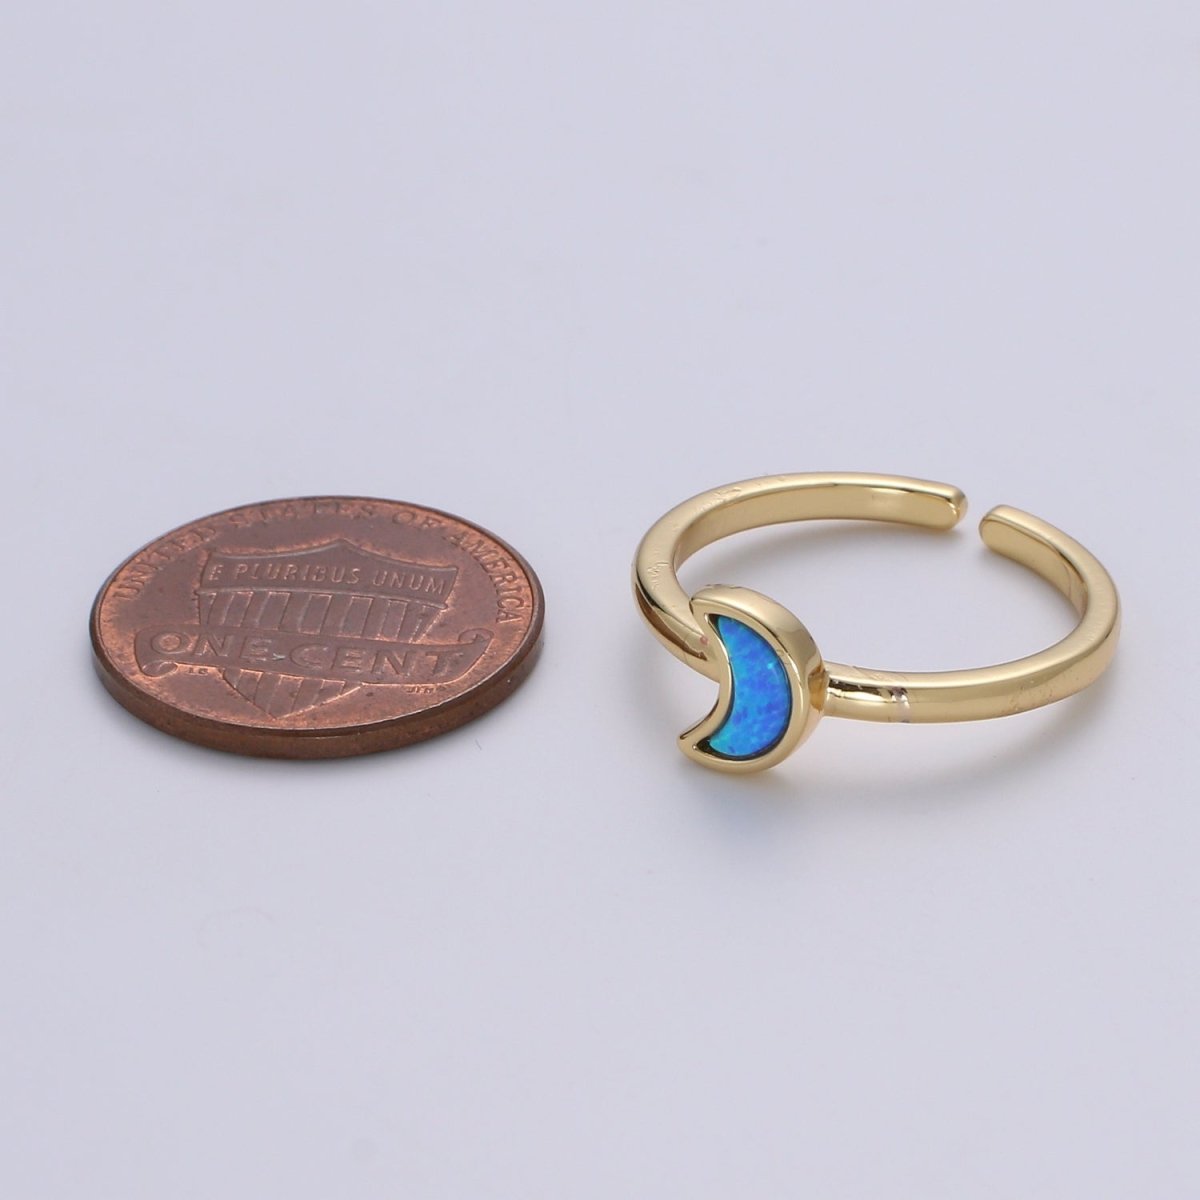 1pc 24K Gold Opal Simulated Ring,Cresent Moon Opal Lab Pendant Charm Ring, Solitaire White Opal Lab Celestial Design Band Jewelry R532 - DLUXCA